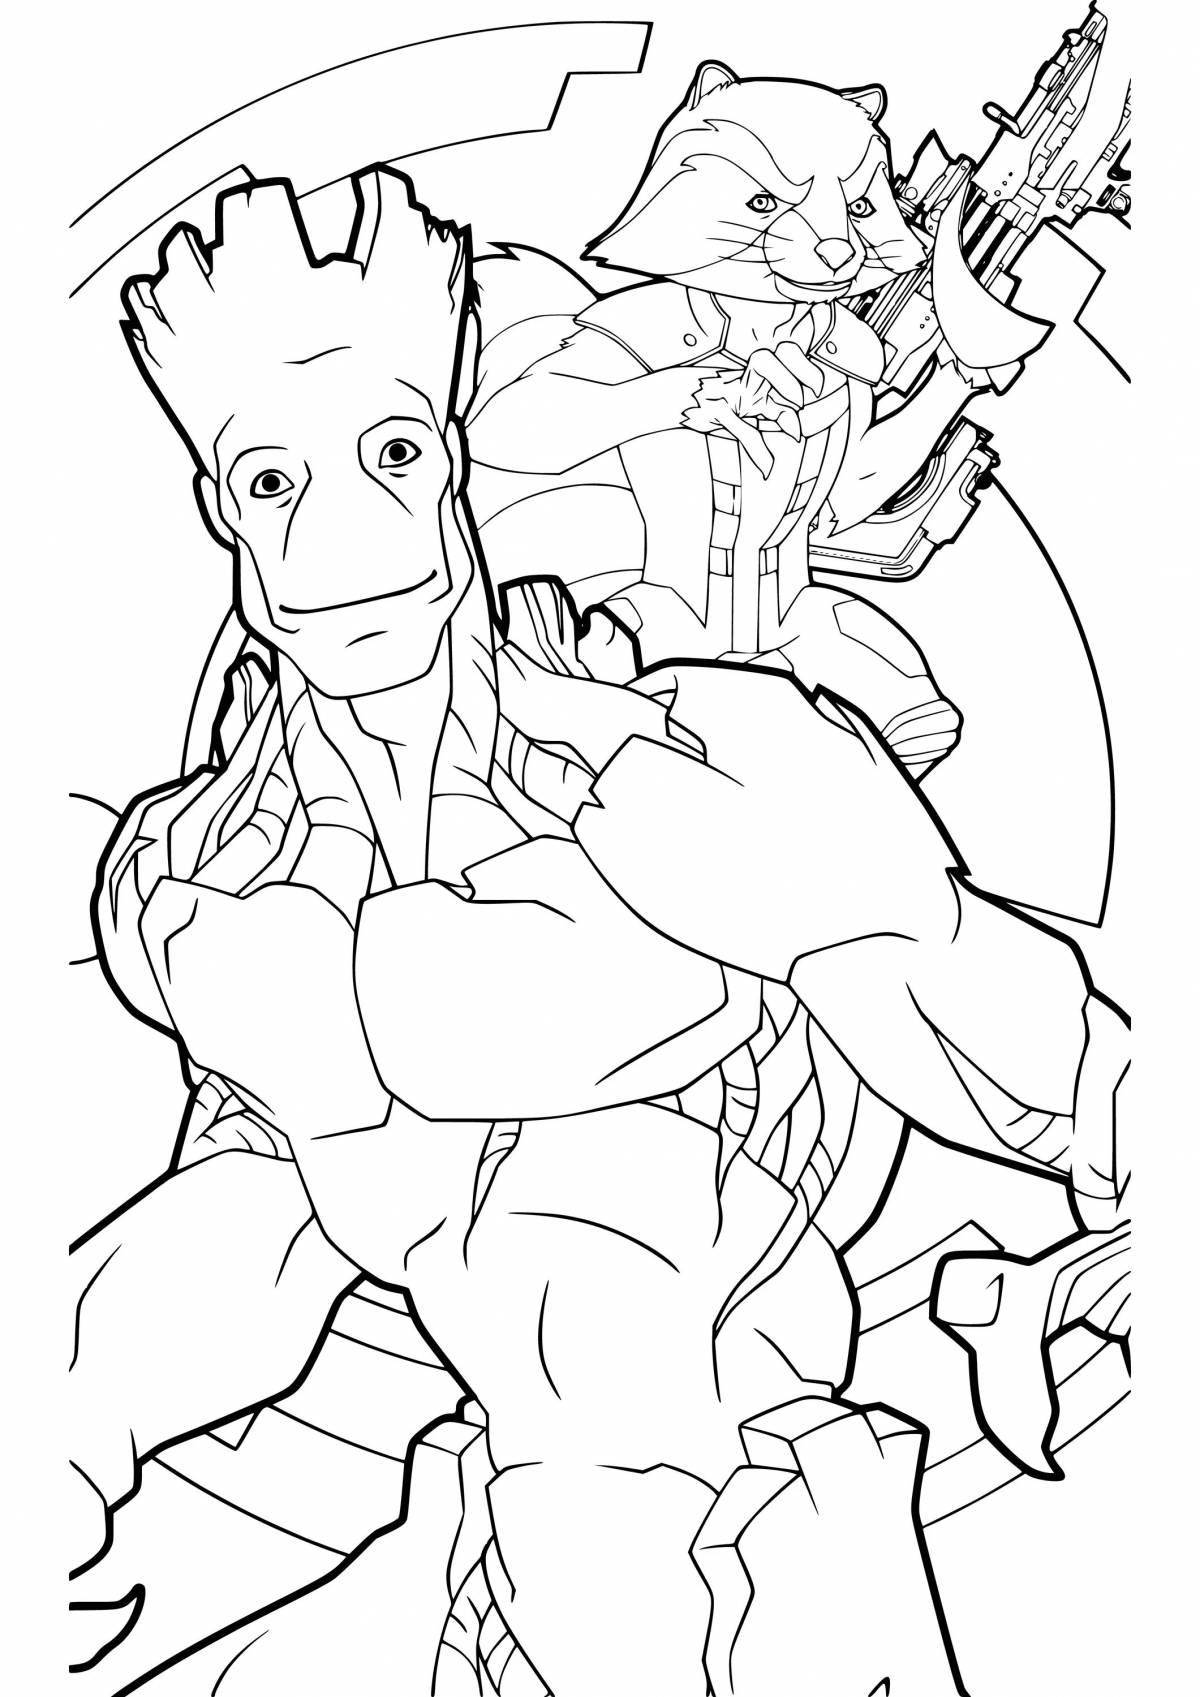 Radiant coloring page groot from marvel